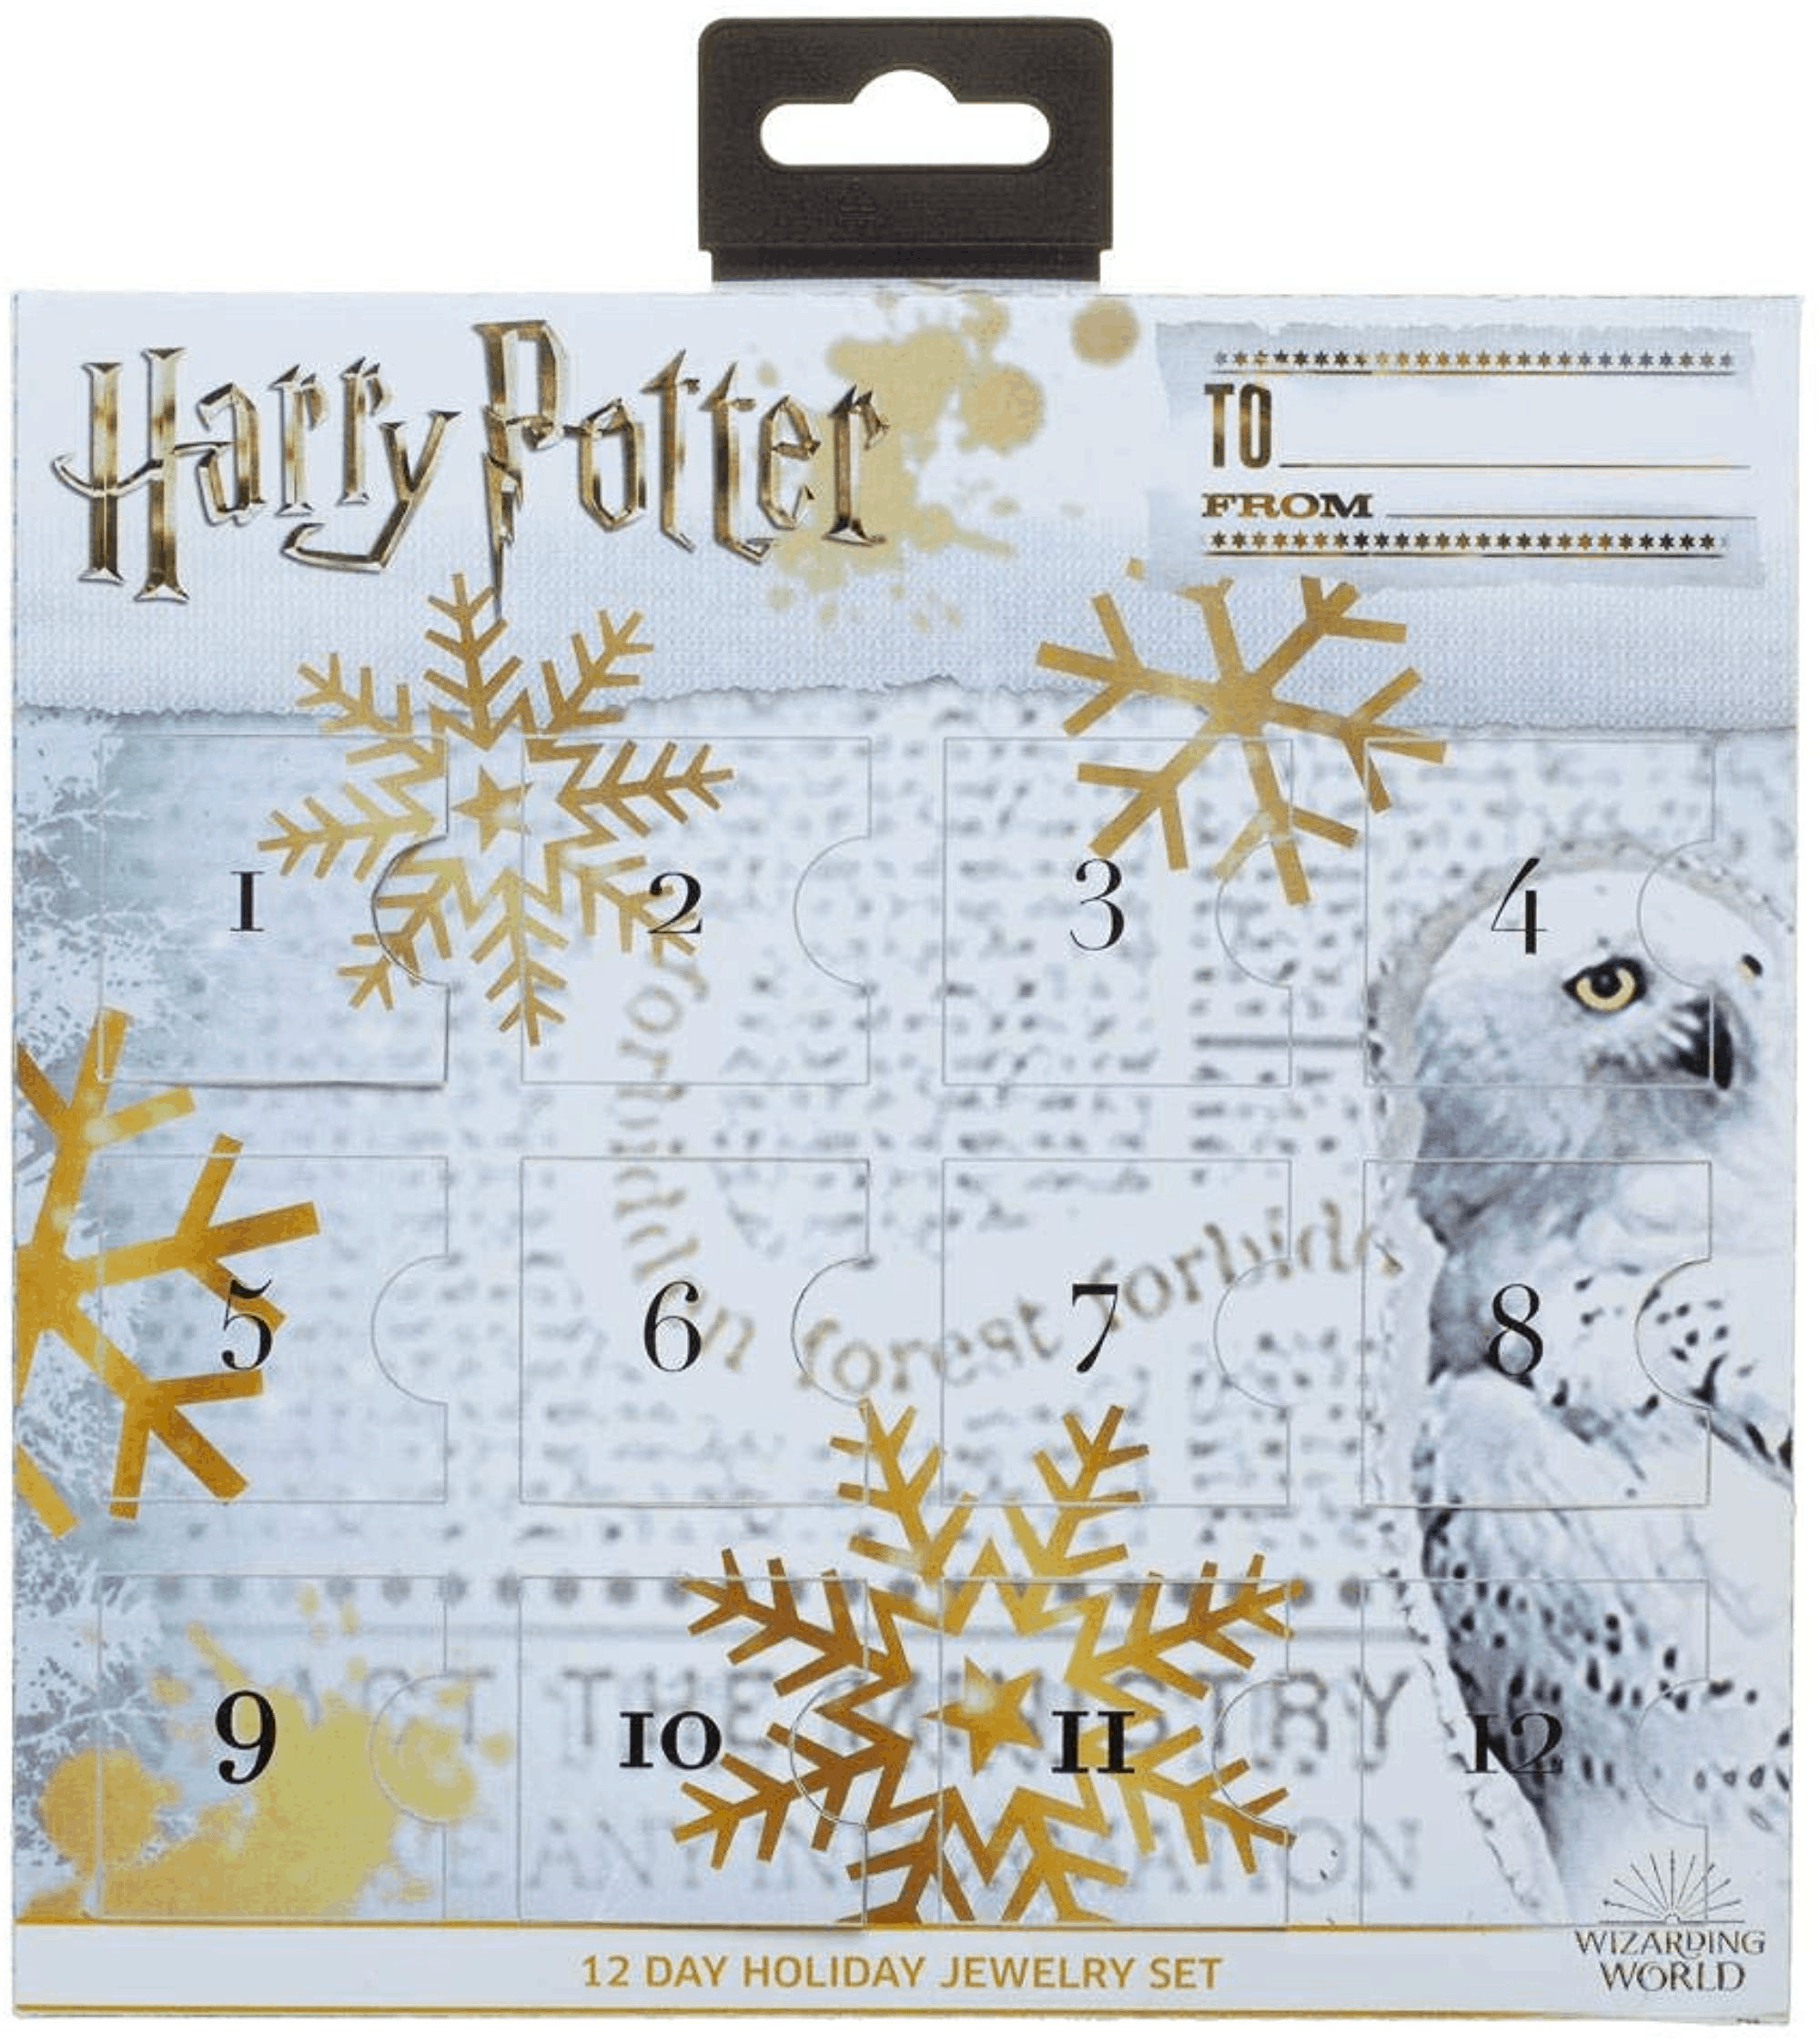 Includes Harry Potter Gifts 24 Surprise Jewellery Gift For Kids Bracelet Necklace with Charms and Pendants Harry Potter Advent Calendar 2019 Girls Accessories Christmas Calendars for Girls Boys